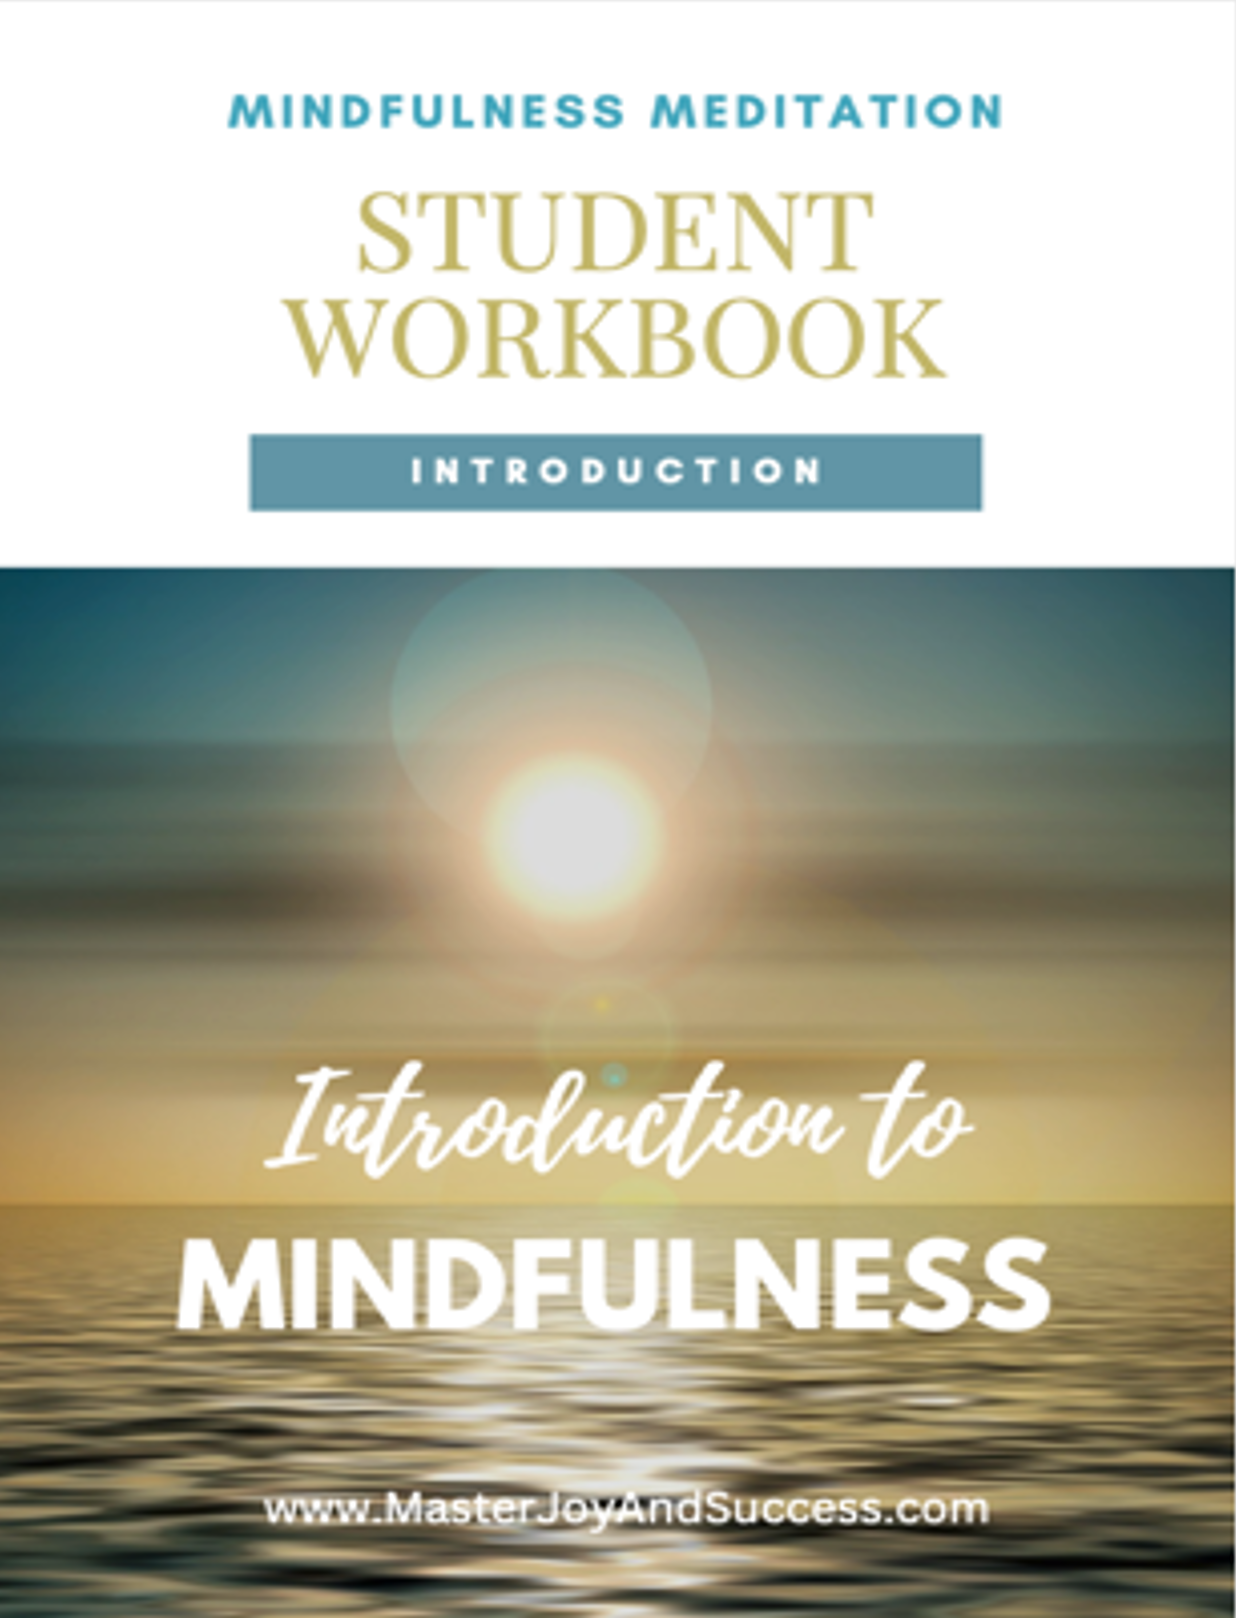 Introductions-to-Mindfulness-FPO